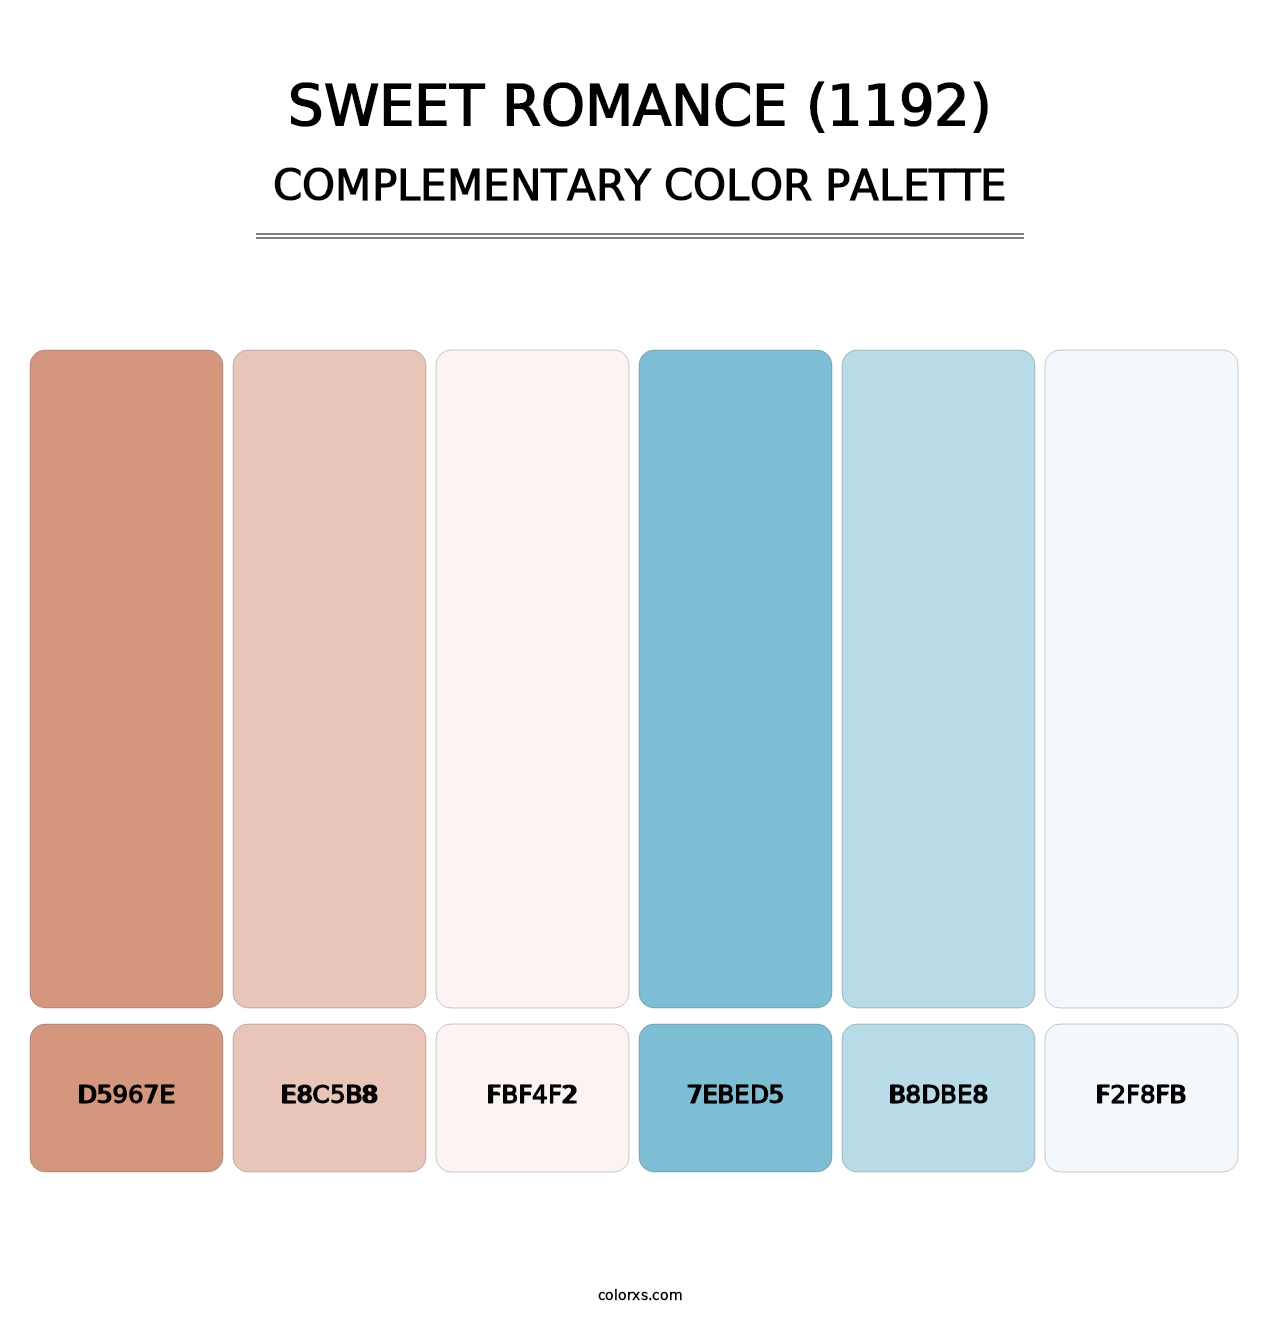 Sweet Romance (1192) - Complementary Color Palette